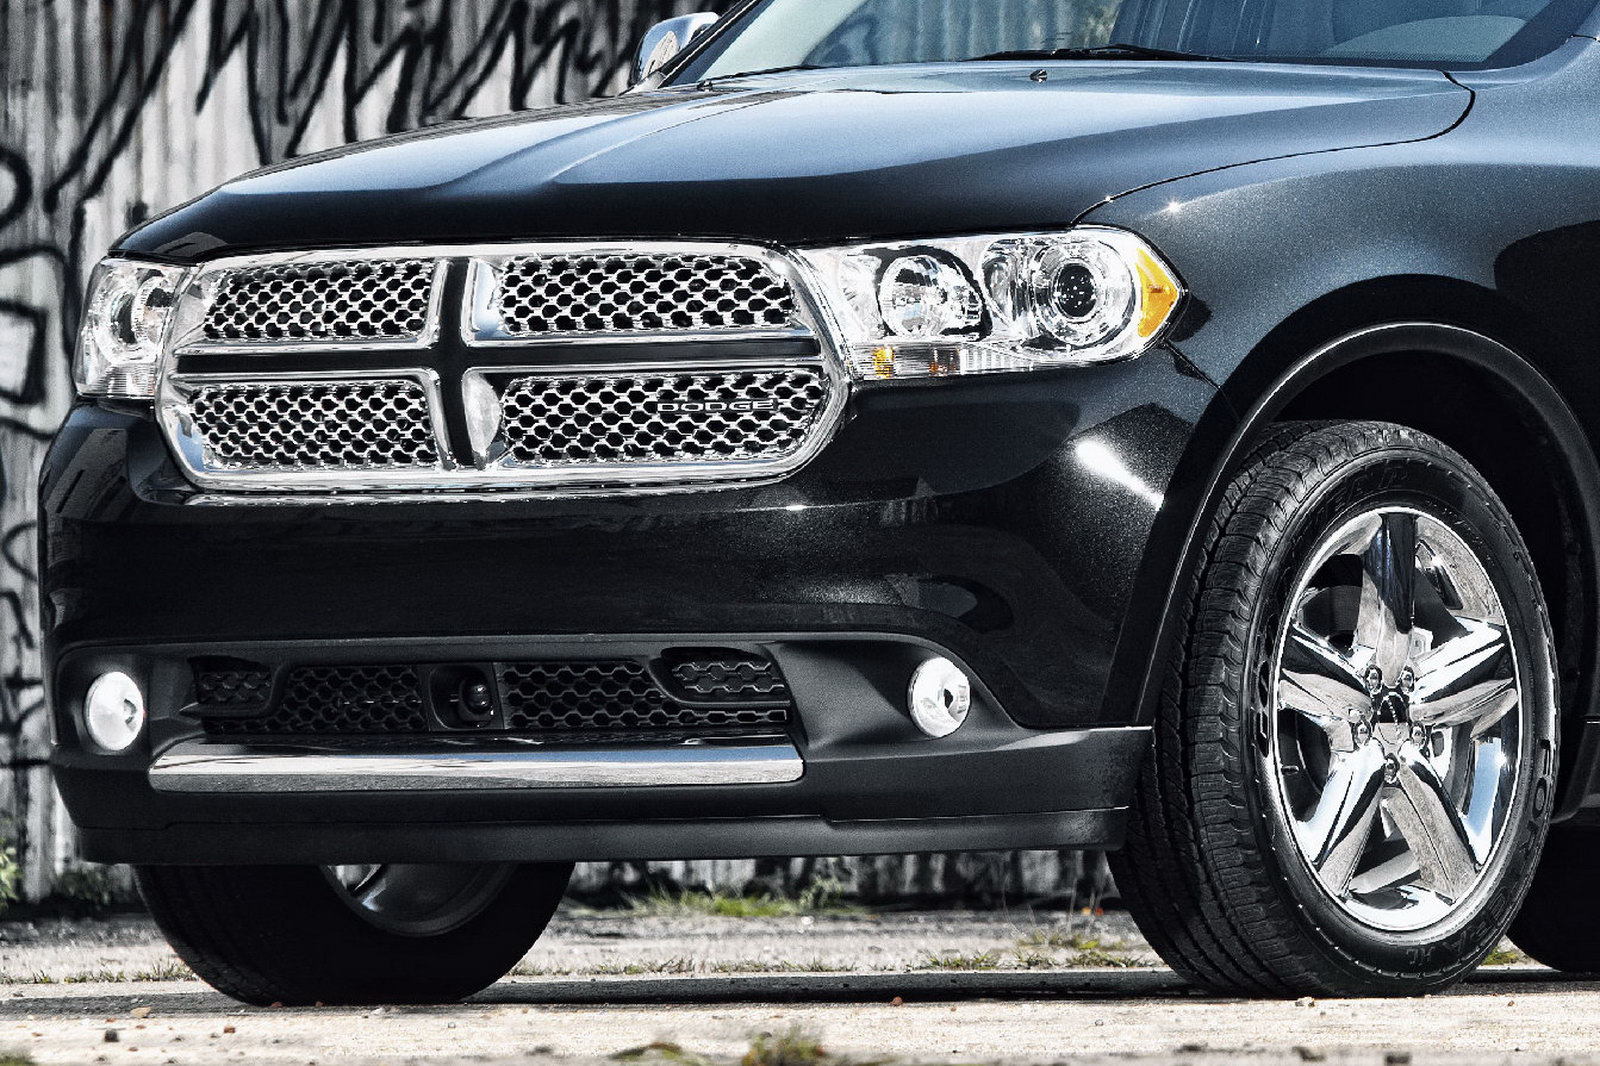 BREAKING: 2011 Dodge Durango 7-Seater SUV Fully Revealed | Carscoops1600 x 1066